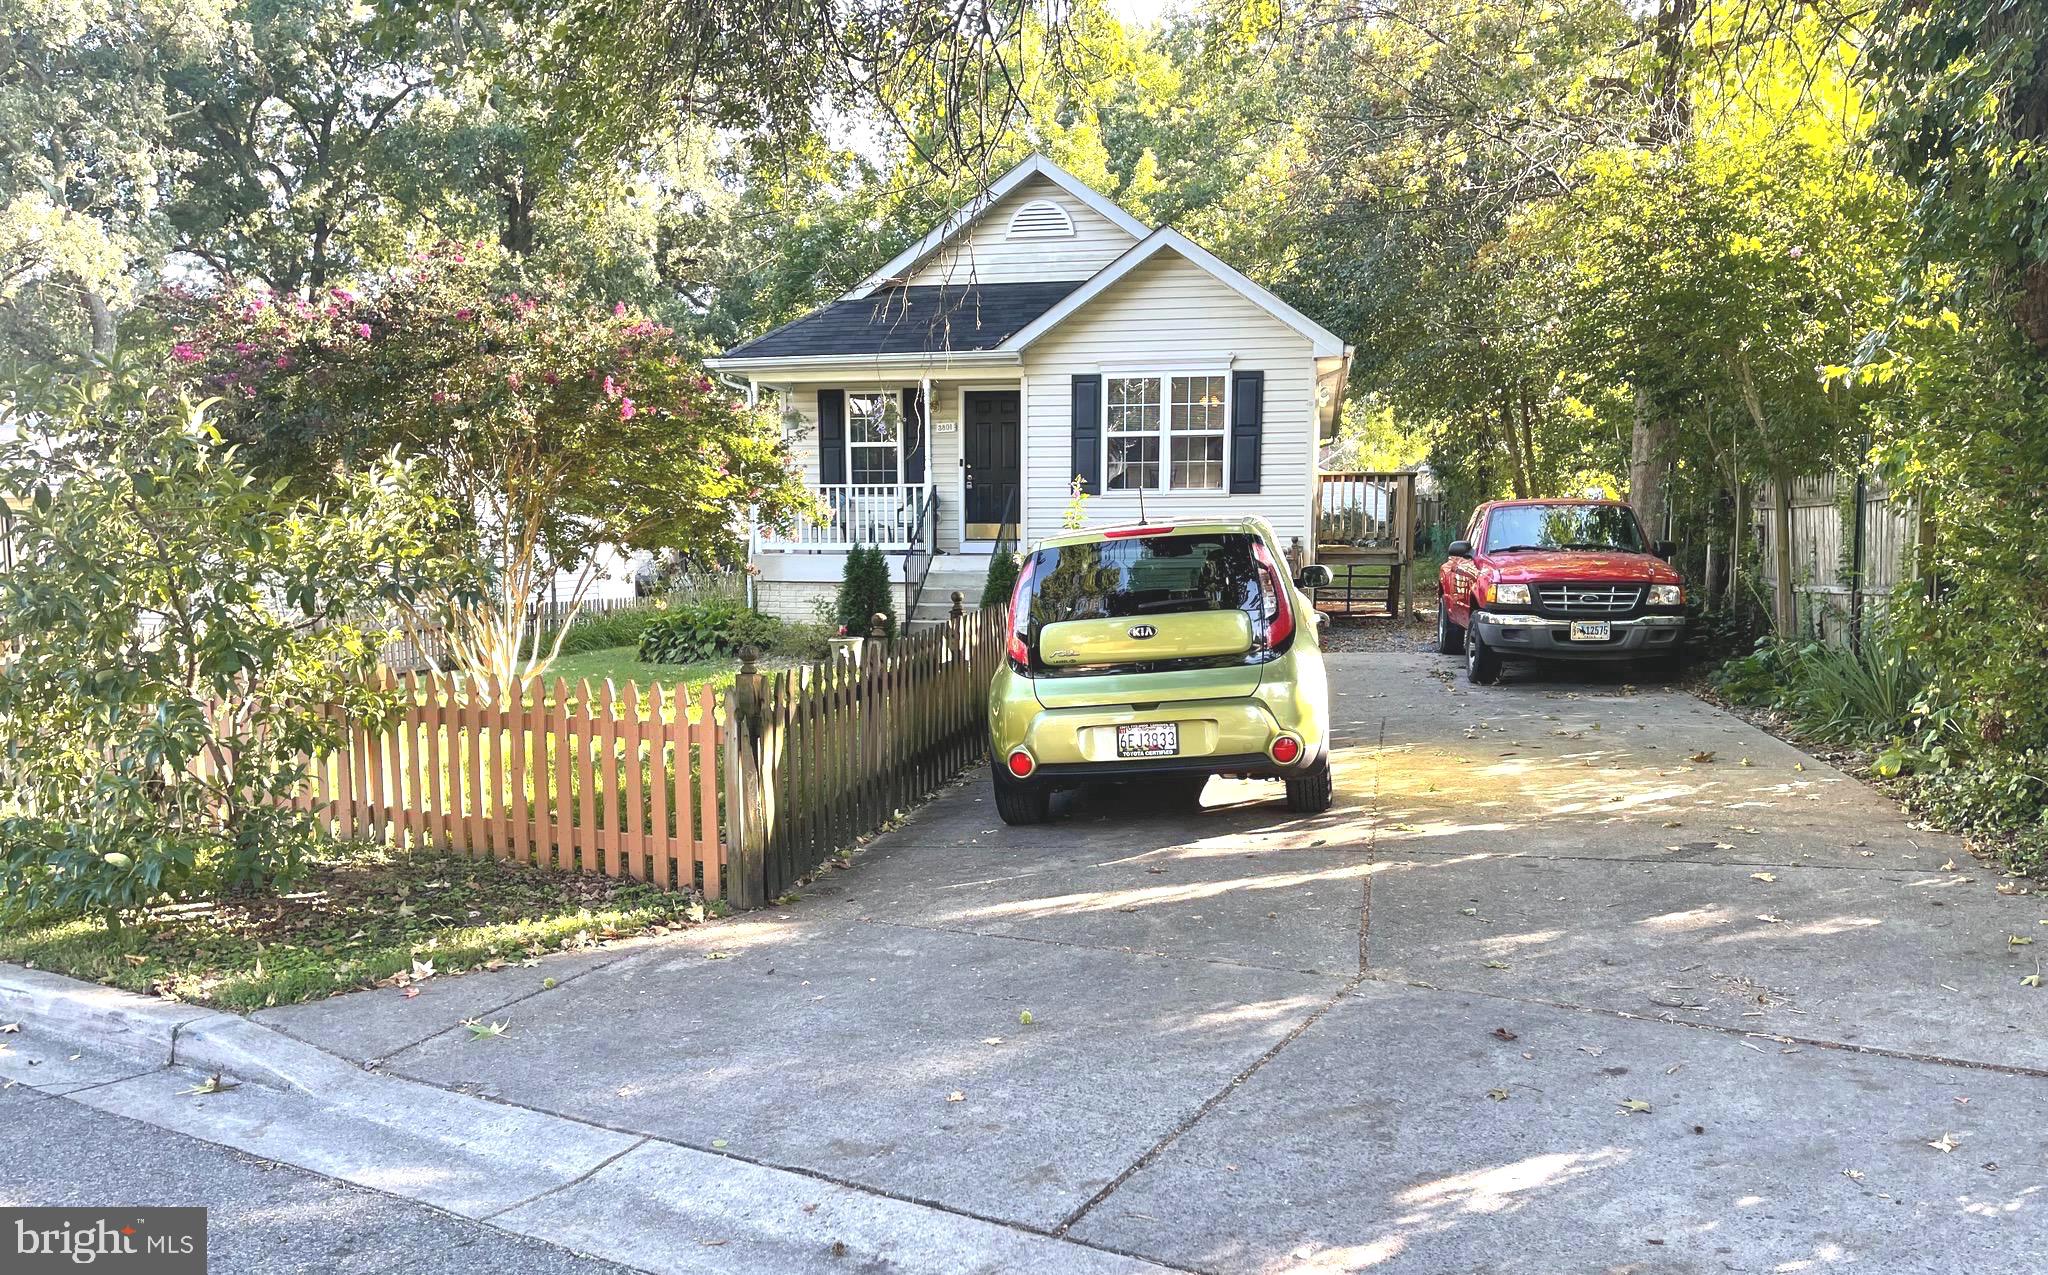 a view of a house with a cars parked in front of it